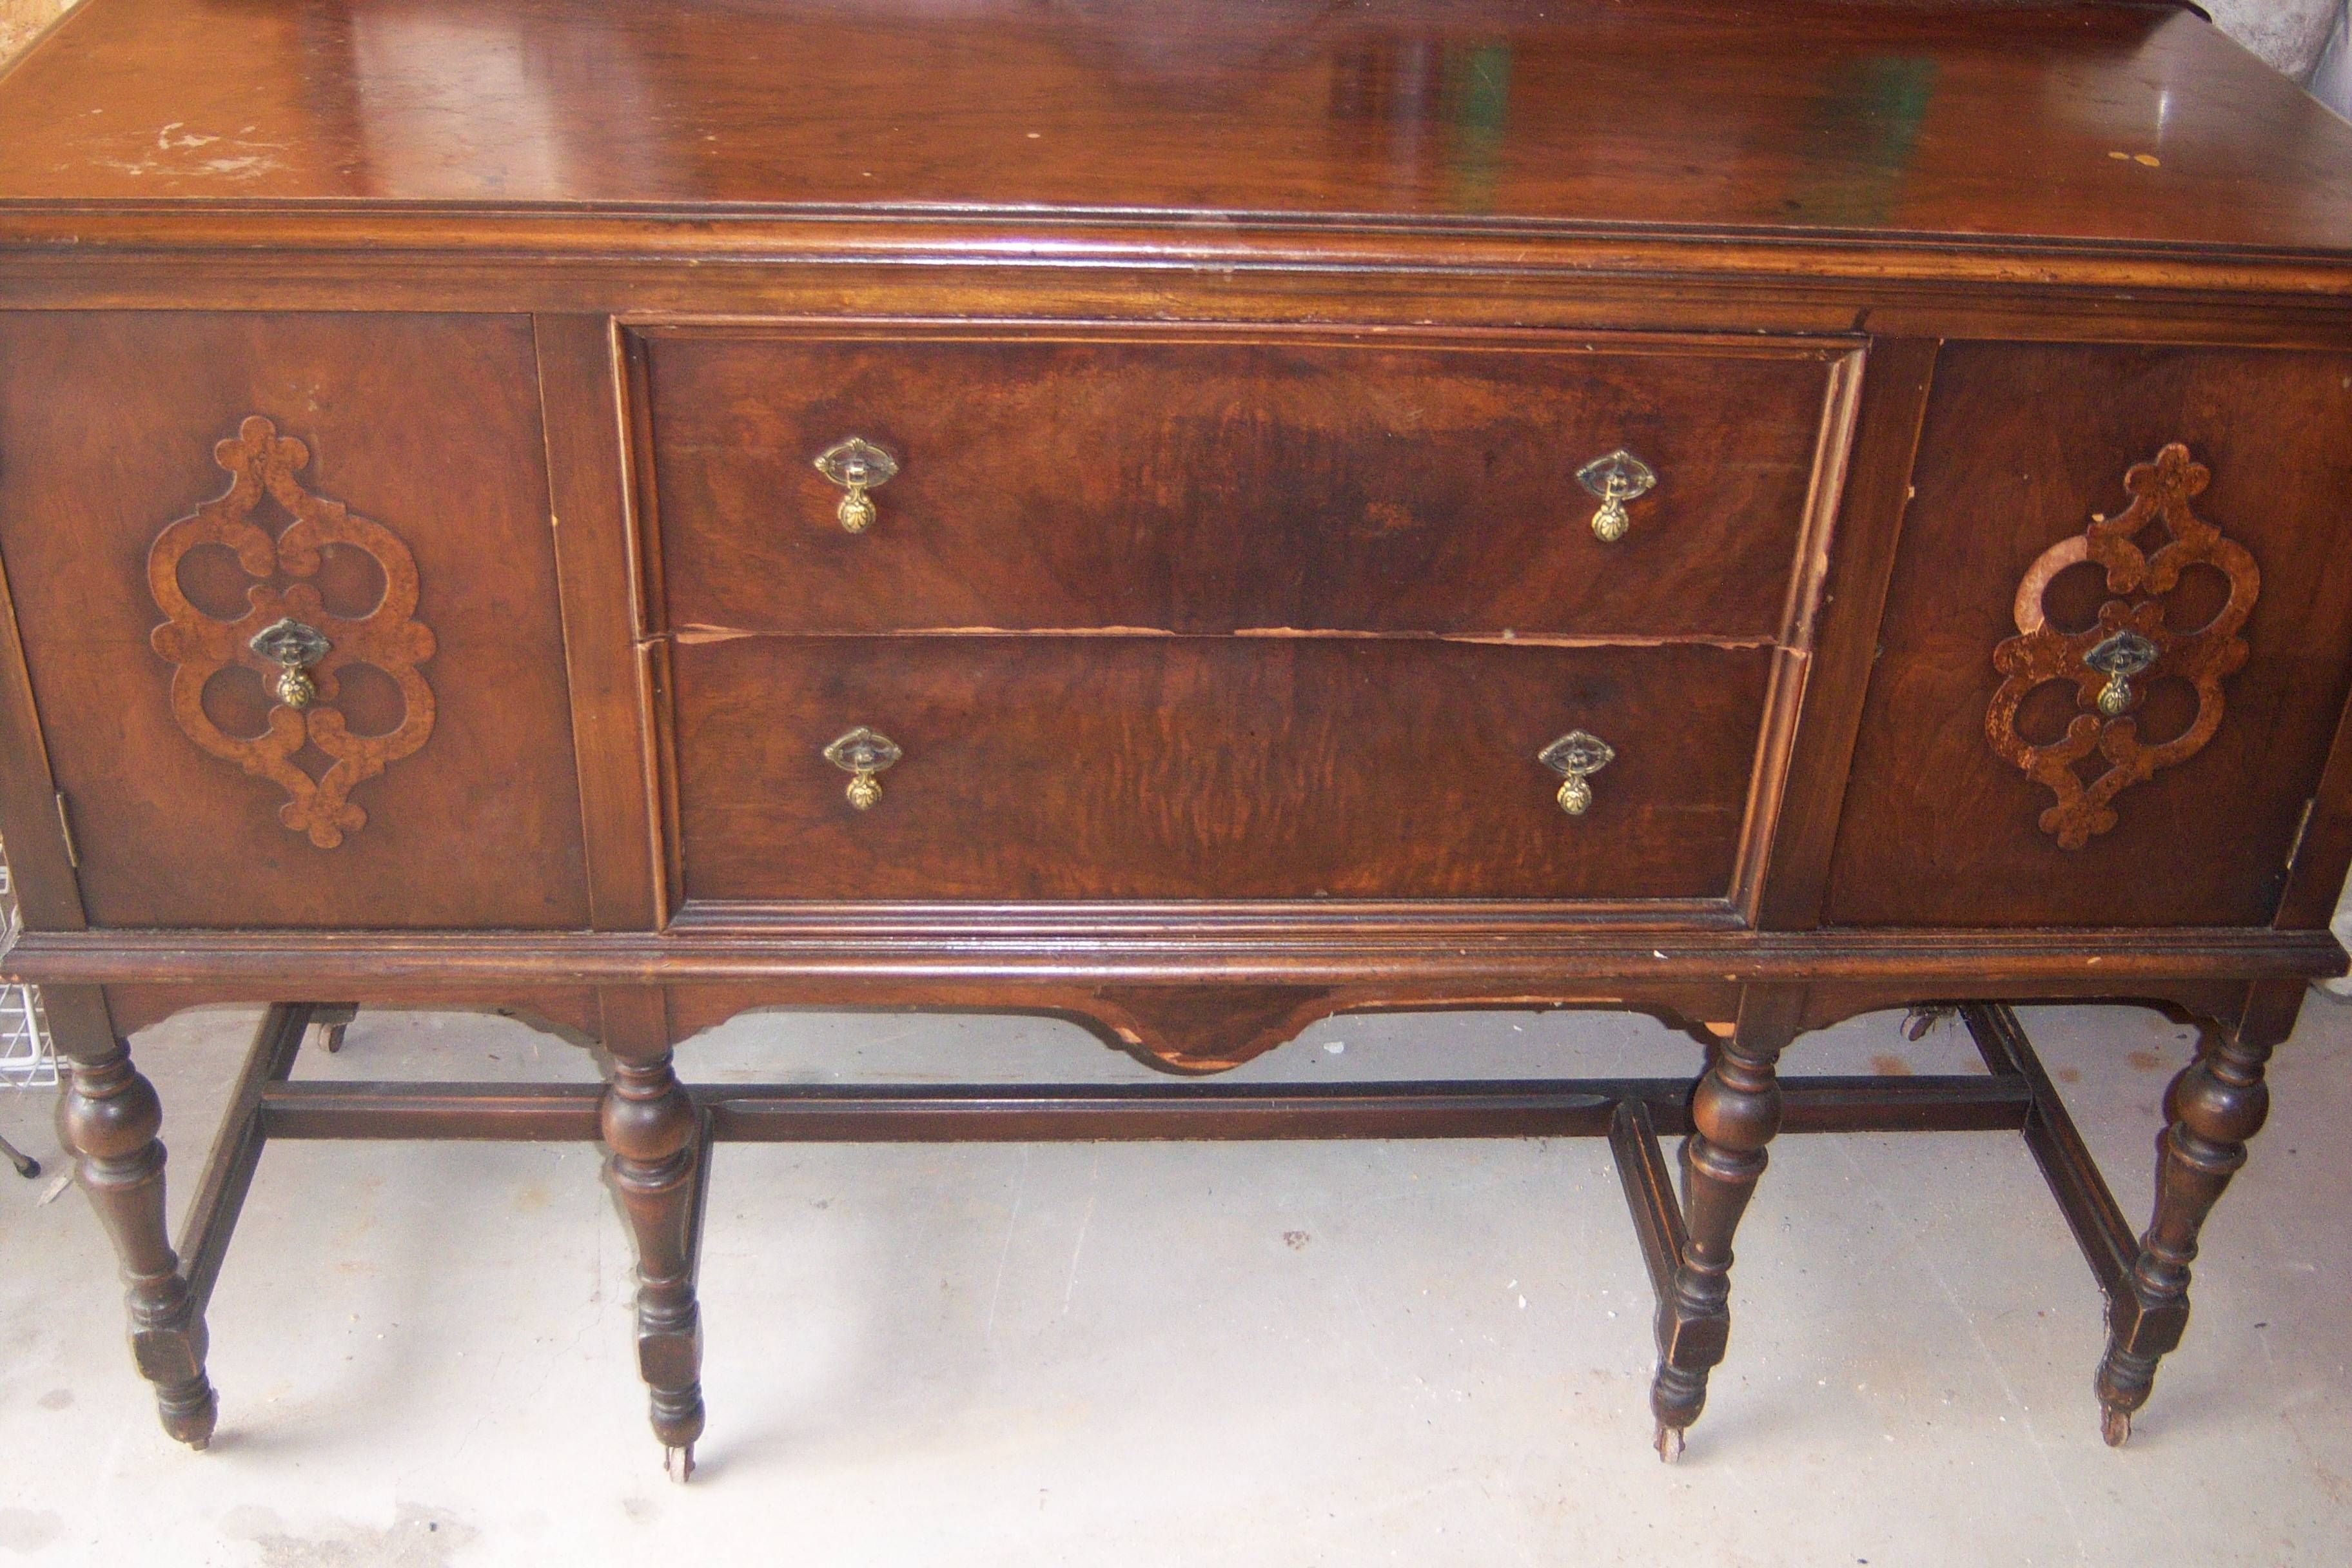 Beautiful Antique Sideboards And Buffets – Bjdgjy With Regard To Recent Antique Sideboards And Buffets (View 2 of 15)